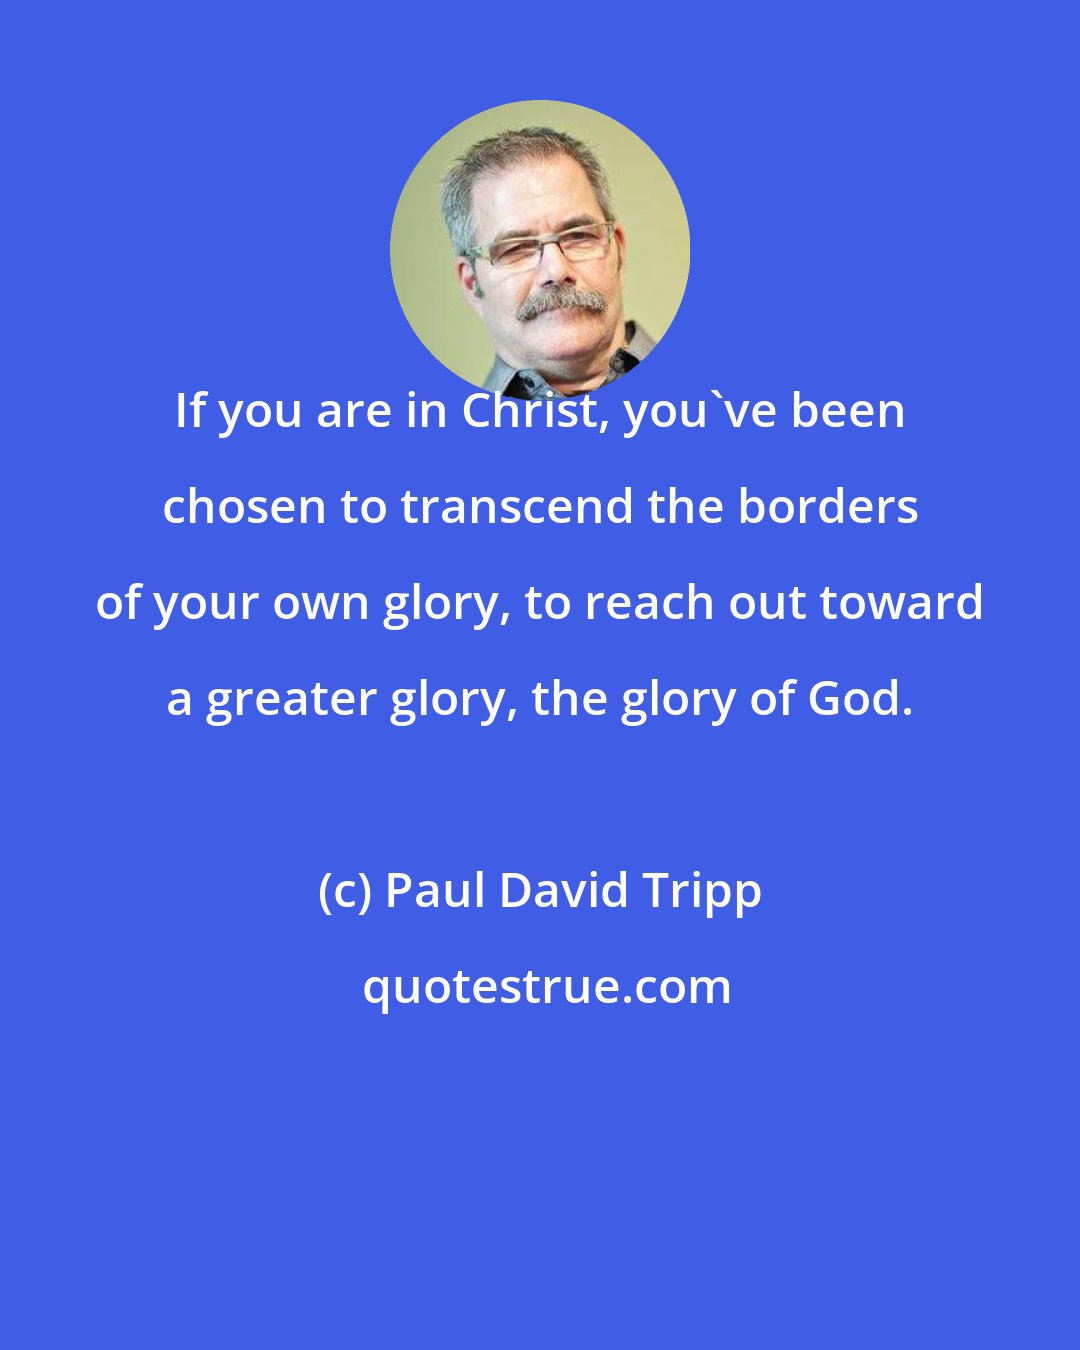 Paul David Tripp: If you are in Christ, you've been chosen to transcend the borders of your own glory, to reach out toward a greater glory, the glory of God.